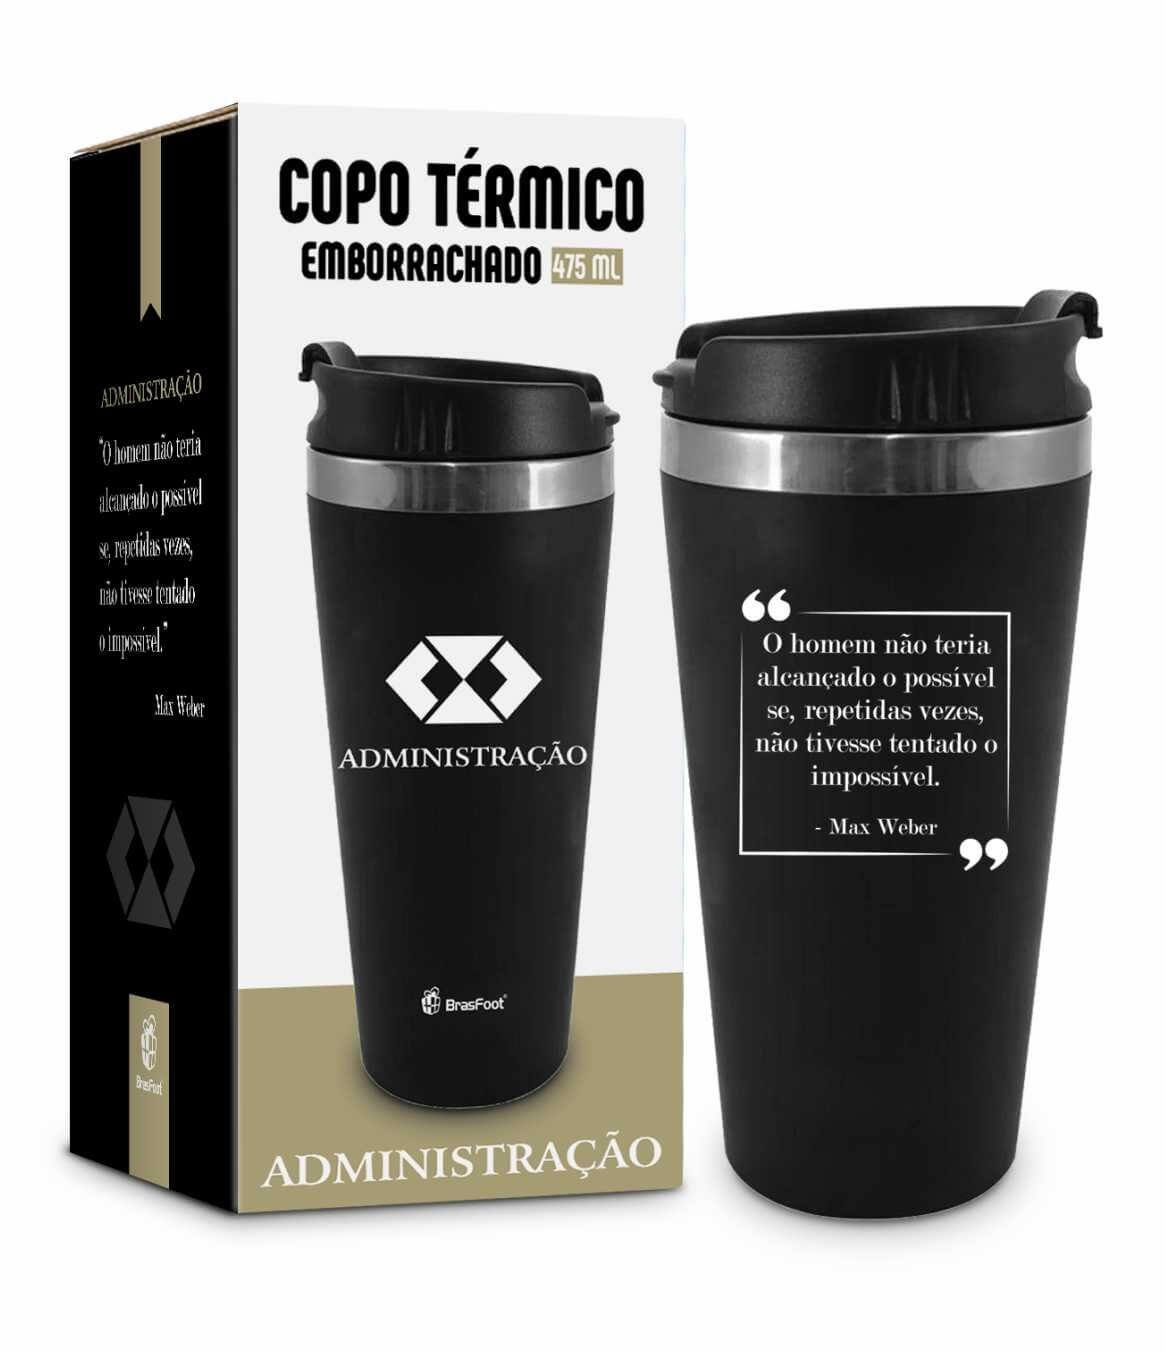 ptl-288-01-thermal_cup_course-administra_o_3d.jpg